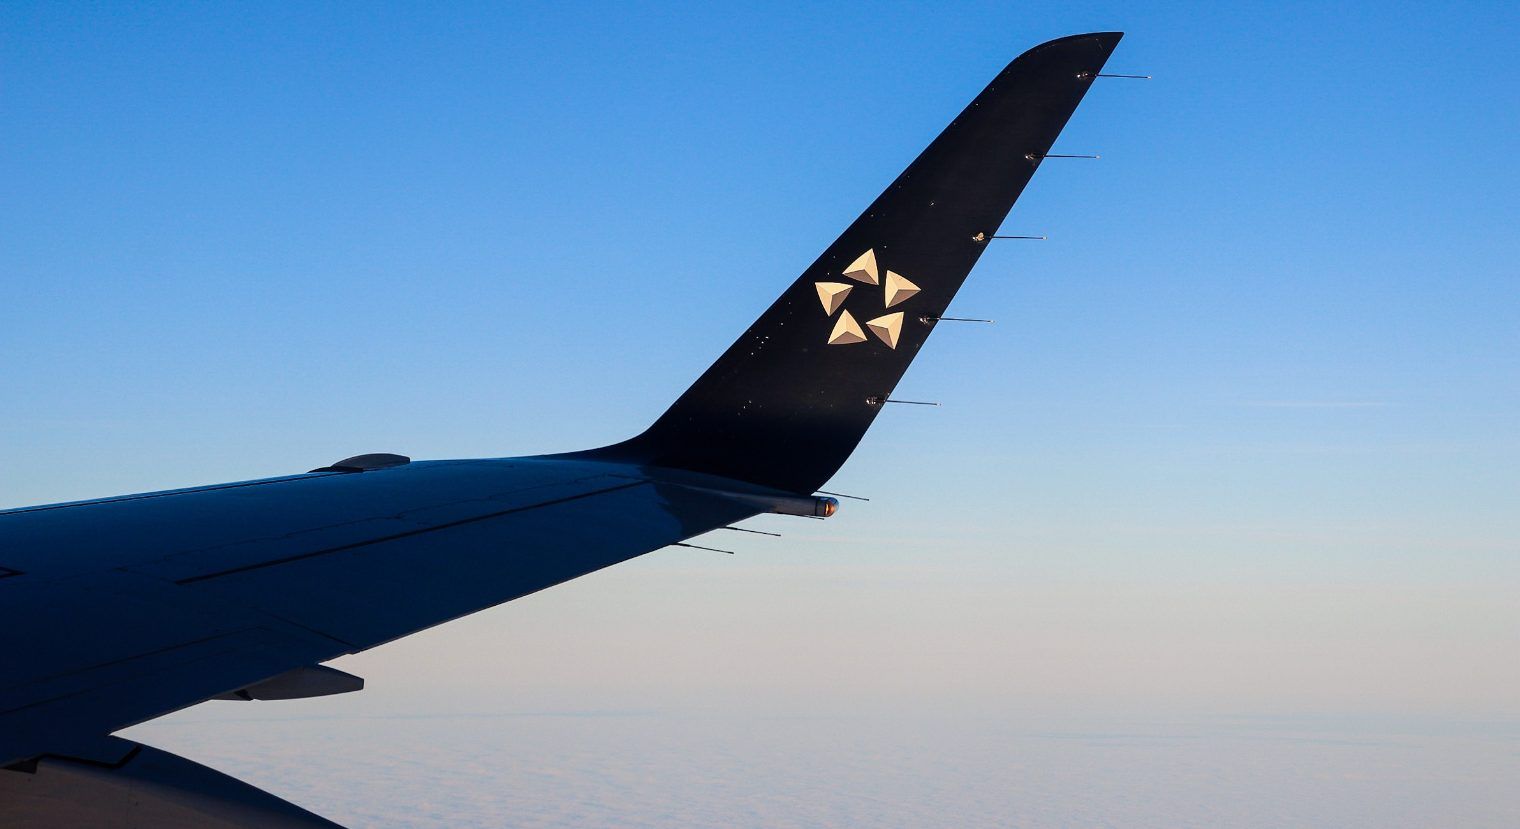 A Star Alliance Logo on the wing of a LOT Polish Airlines Embraer E170 flying in the sky.